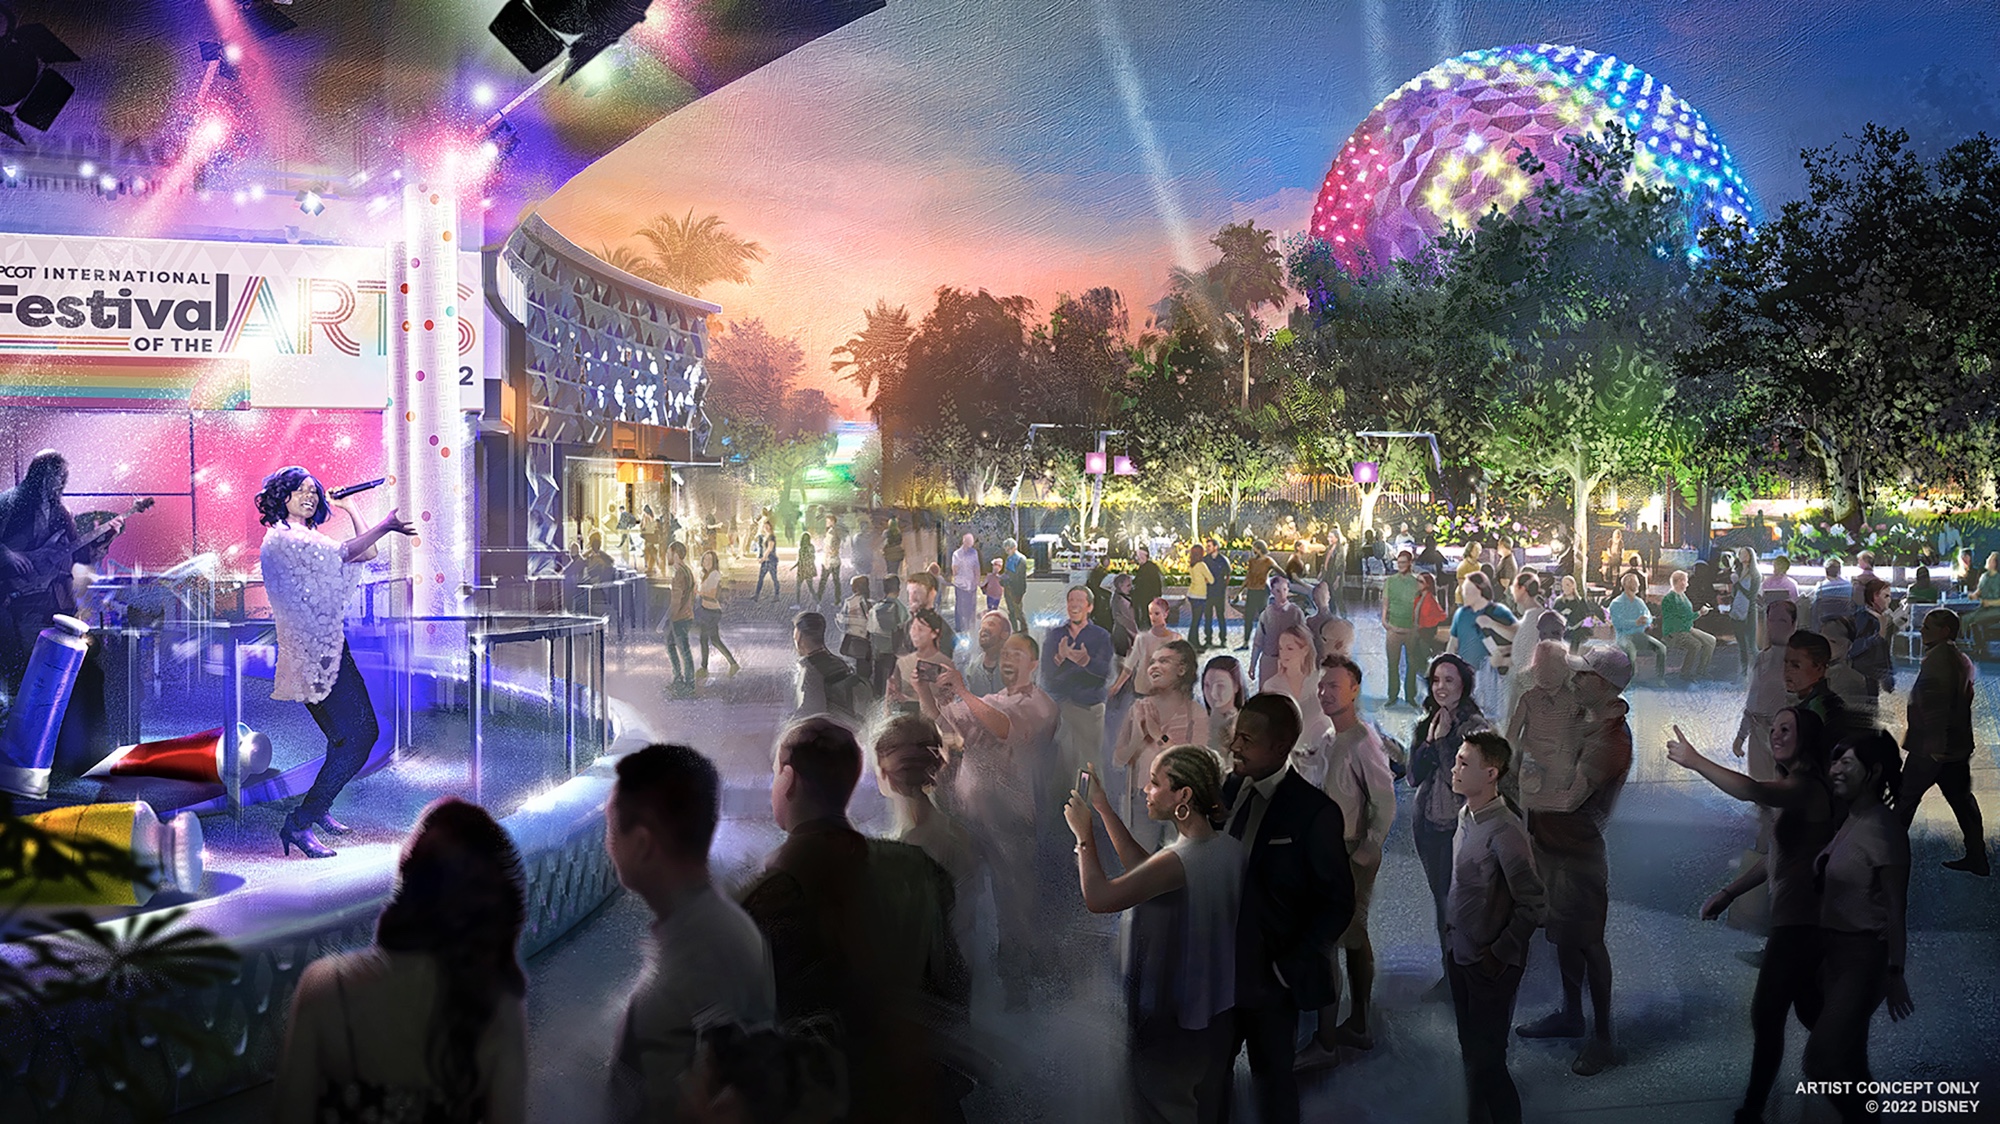 Concept Art of Downgraded World Celebration Festival Area Coming to EPCOT